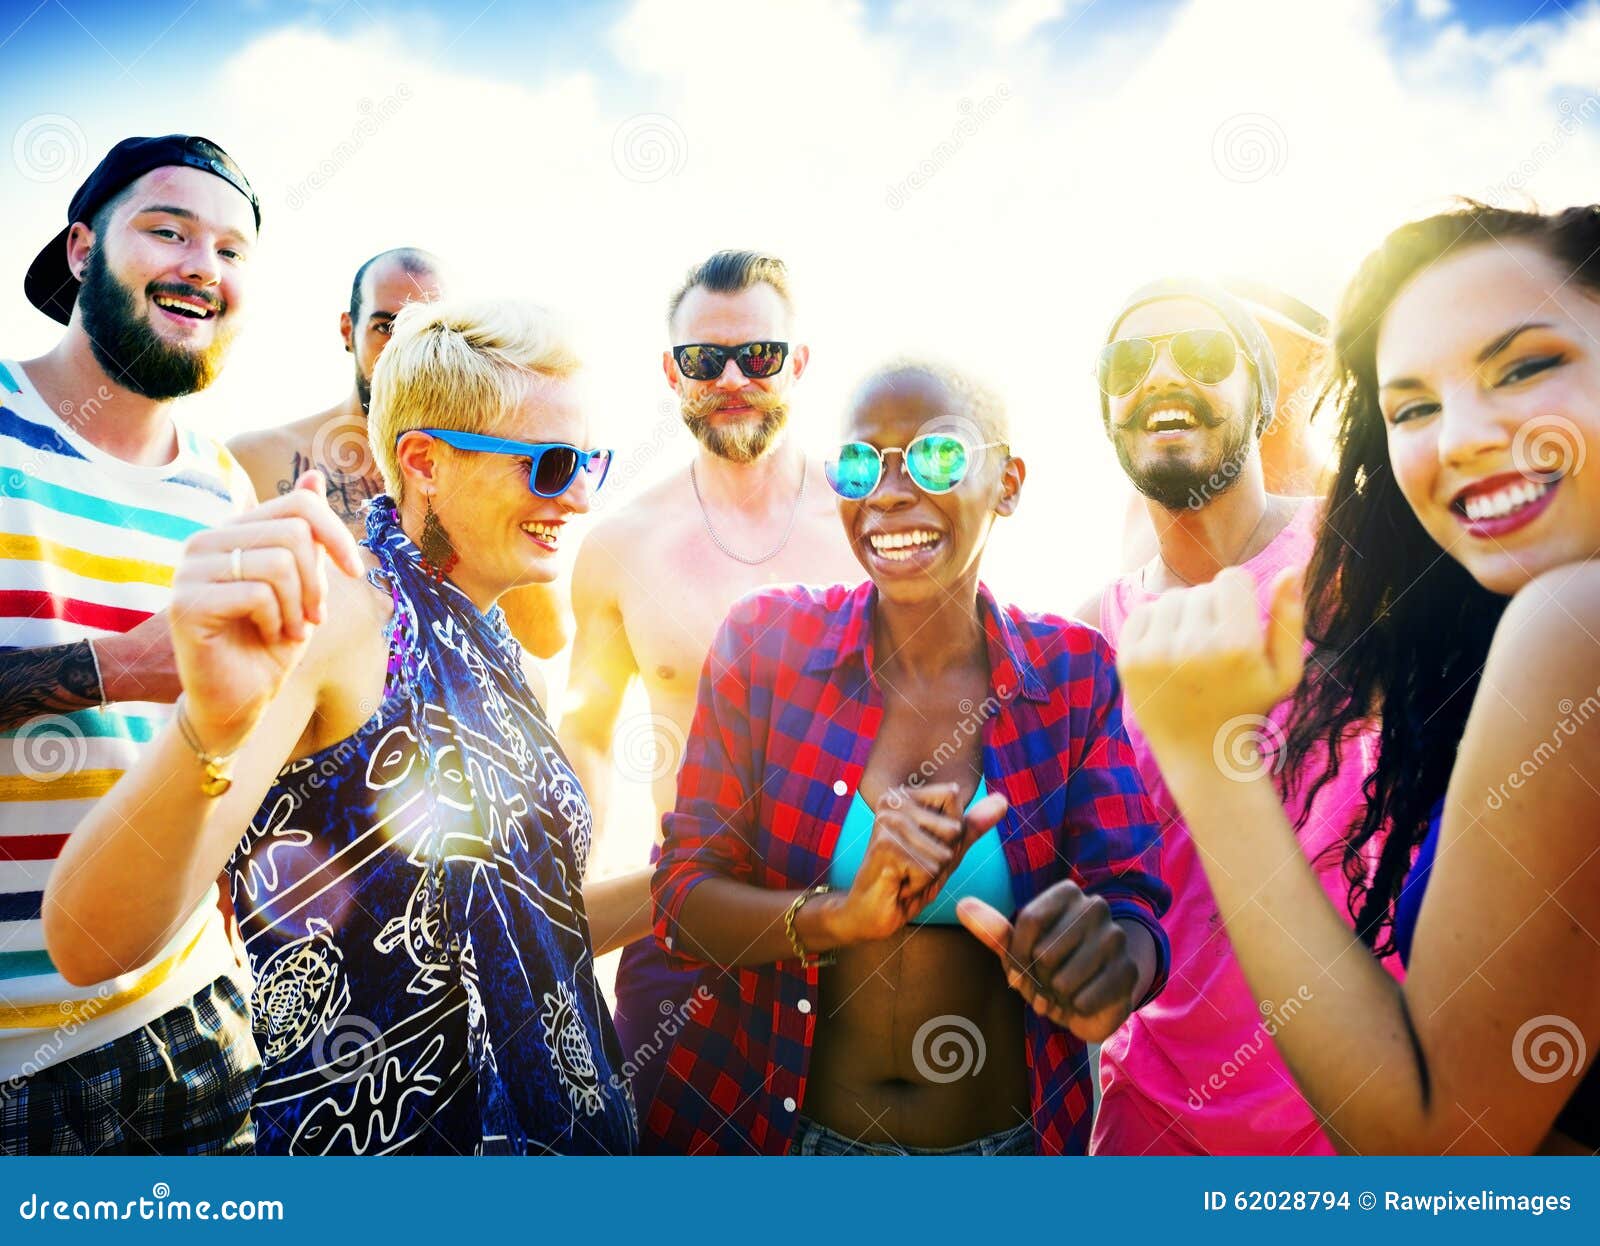 Teenagers Friends Beach Party Happiness Concept Stock Photo - Image of ...